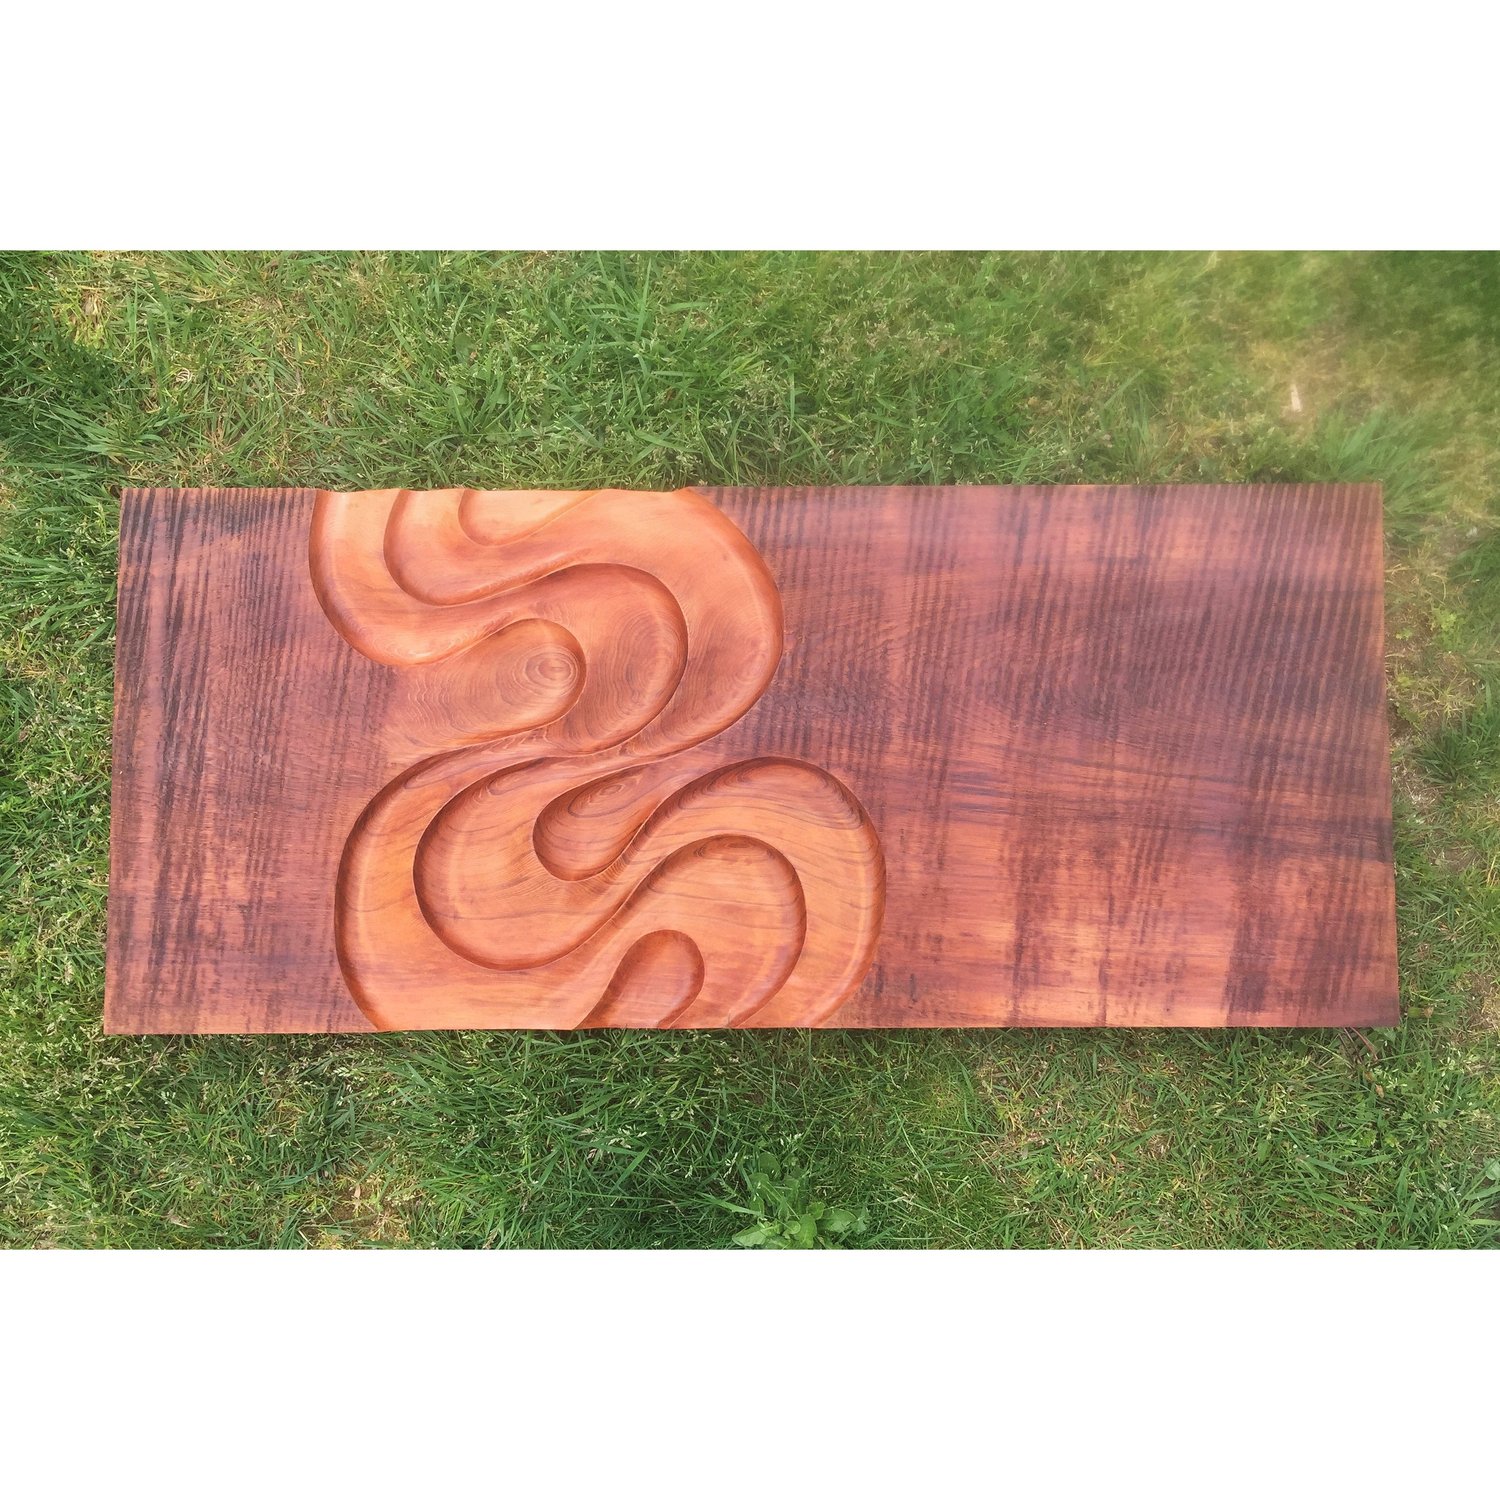 Image of Colliding with nothing else. Red cedar wall hanging